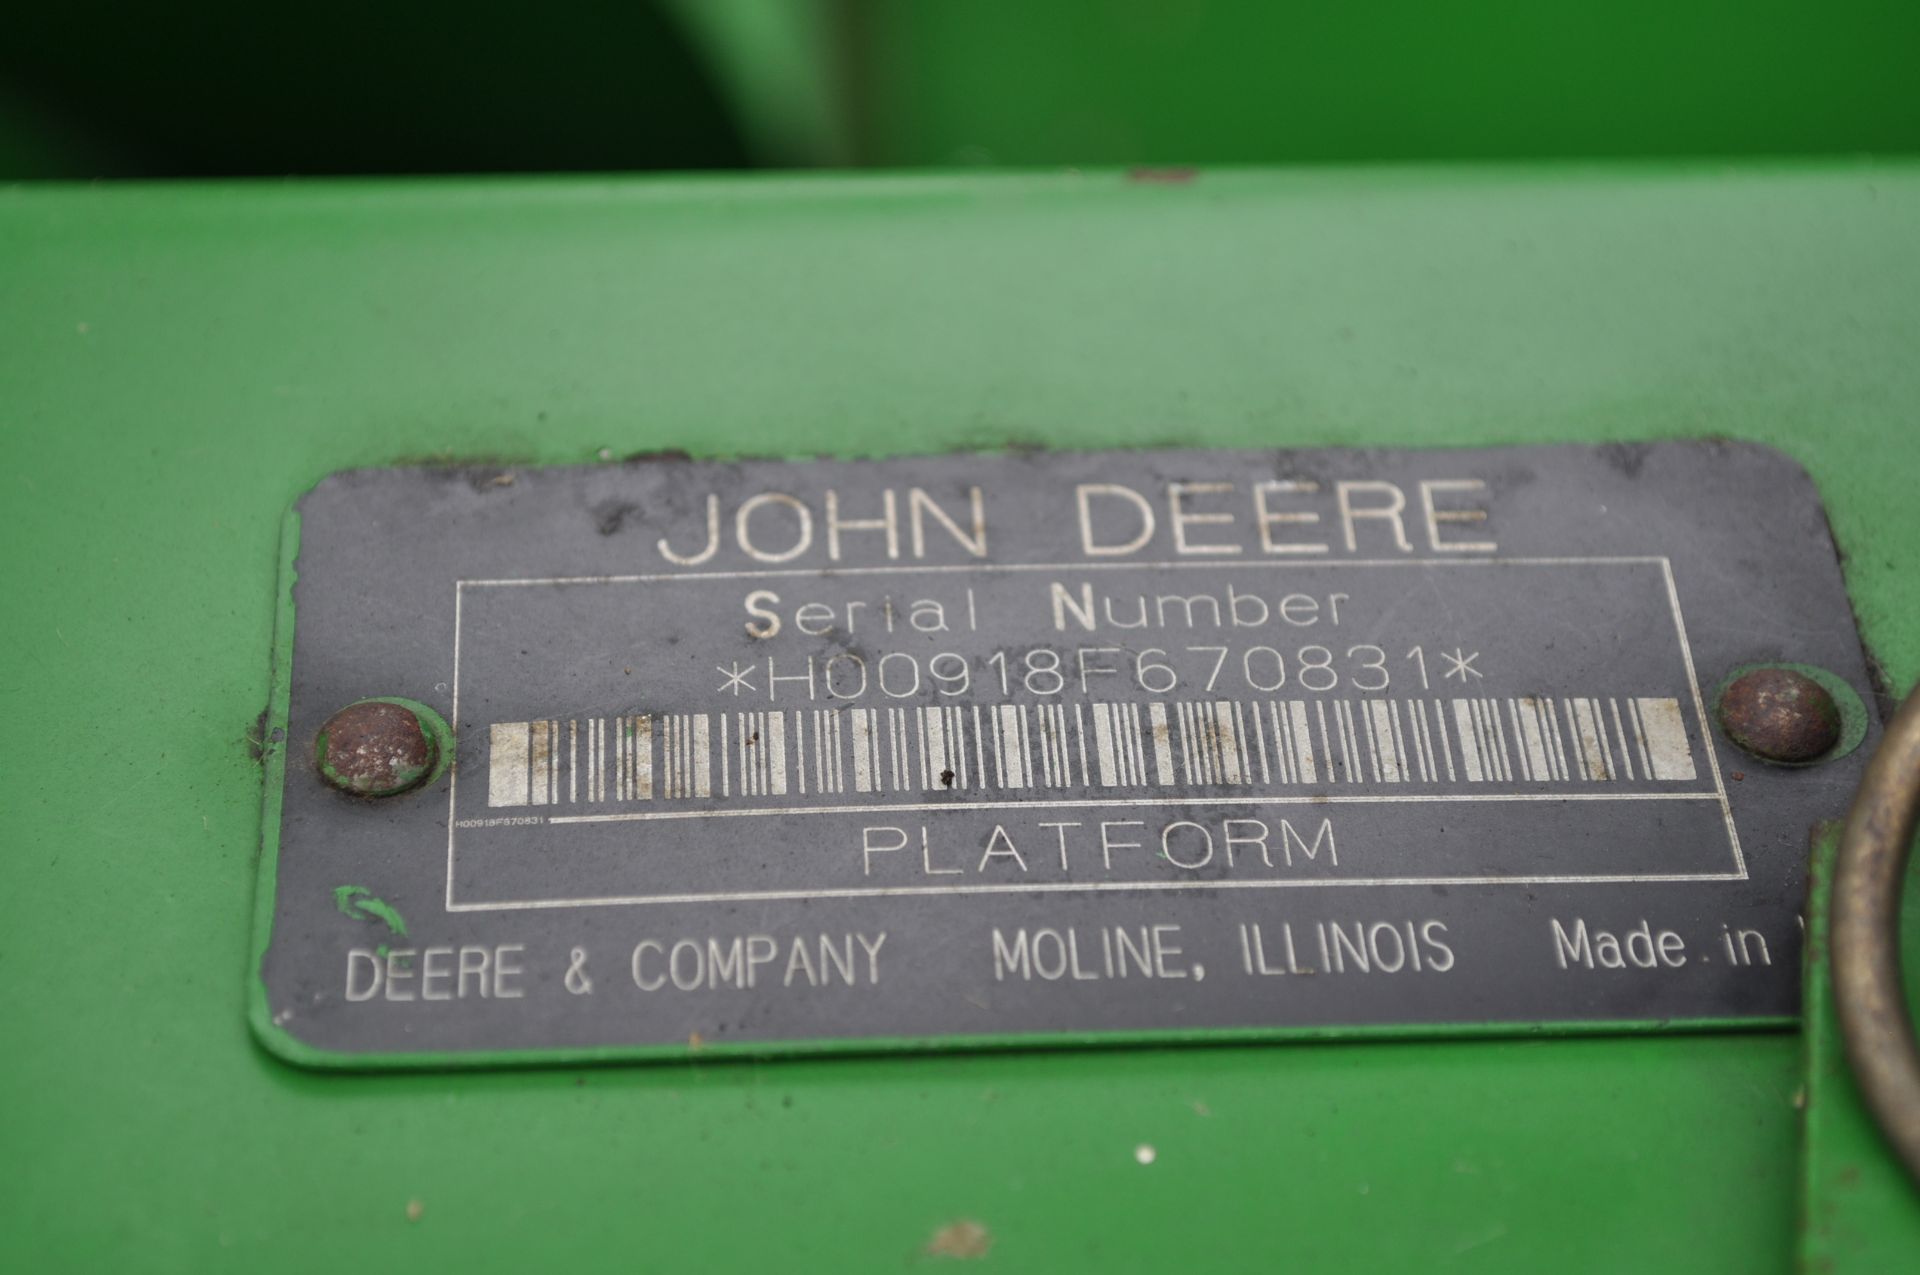 18’ John Deere 918 grain head, hyd fore/aft, row crop dividers, poly skid shoes, SN H00918F670831 - Image 8 of 10